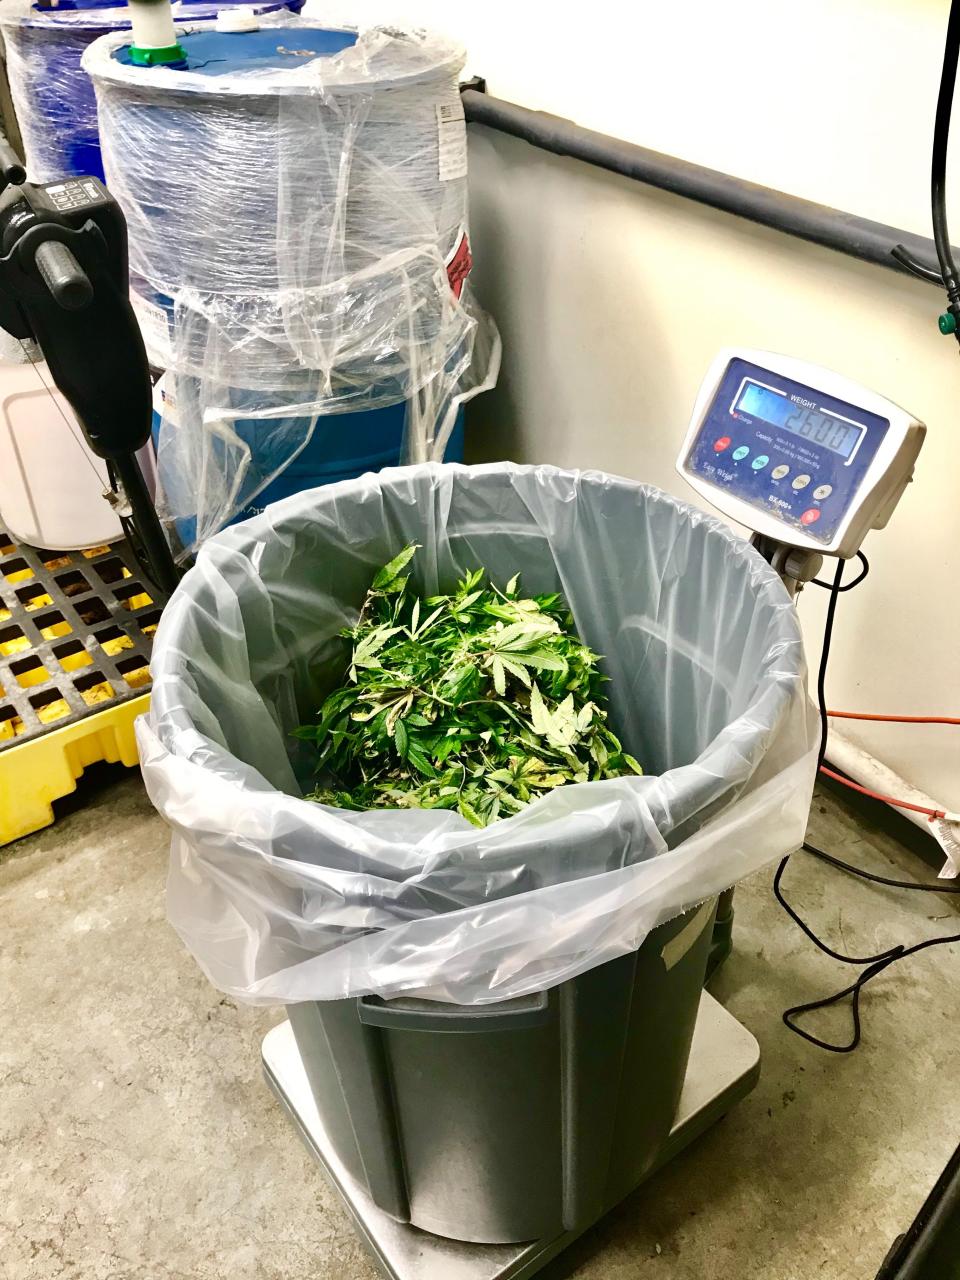 Discarded marijuana stems and leaves are weighed and tracked at Cresco Labs in Joliet, Illinois on May 22, 2019. Image credit: Alexis Keenan/Yahoo Finance